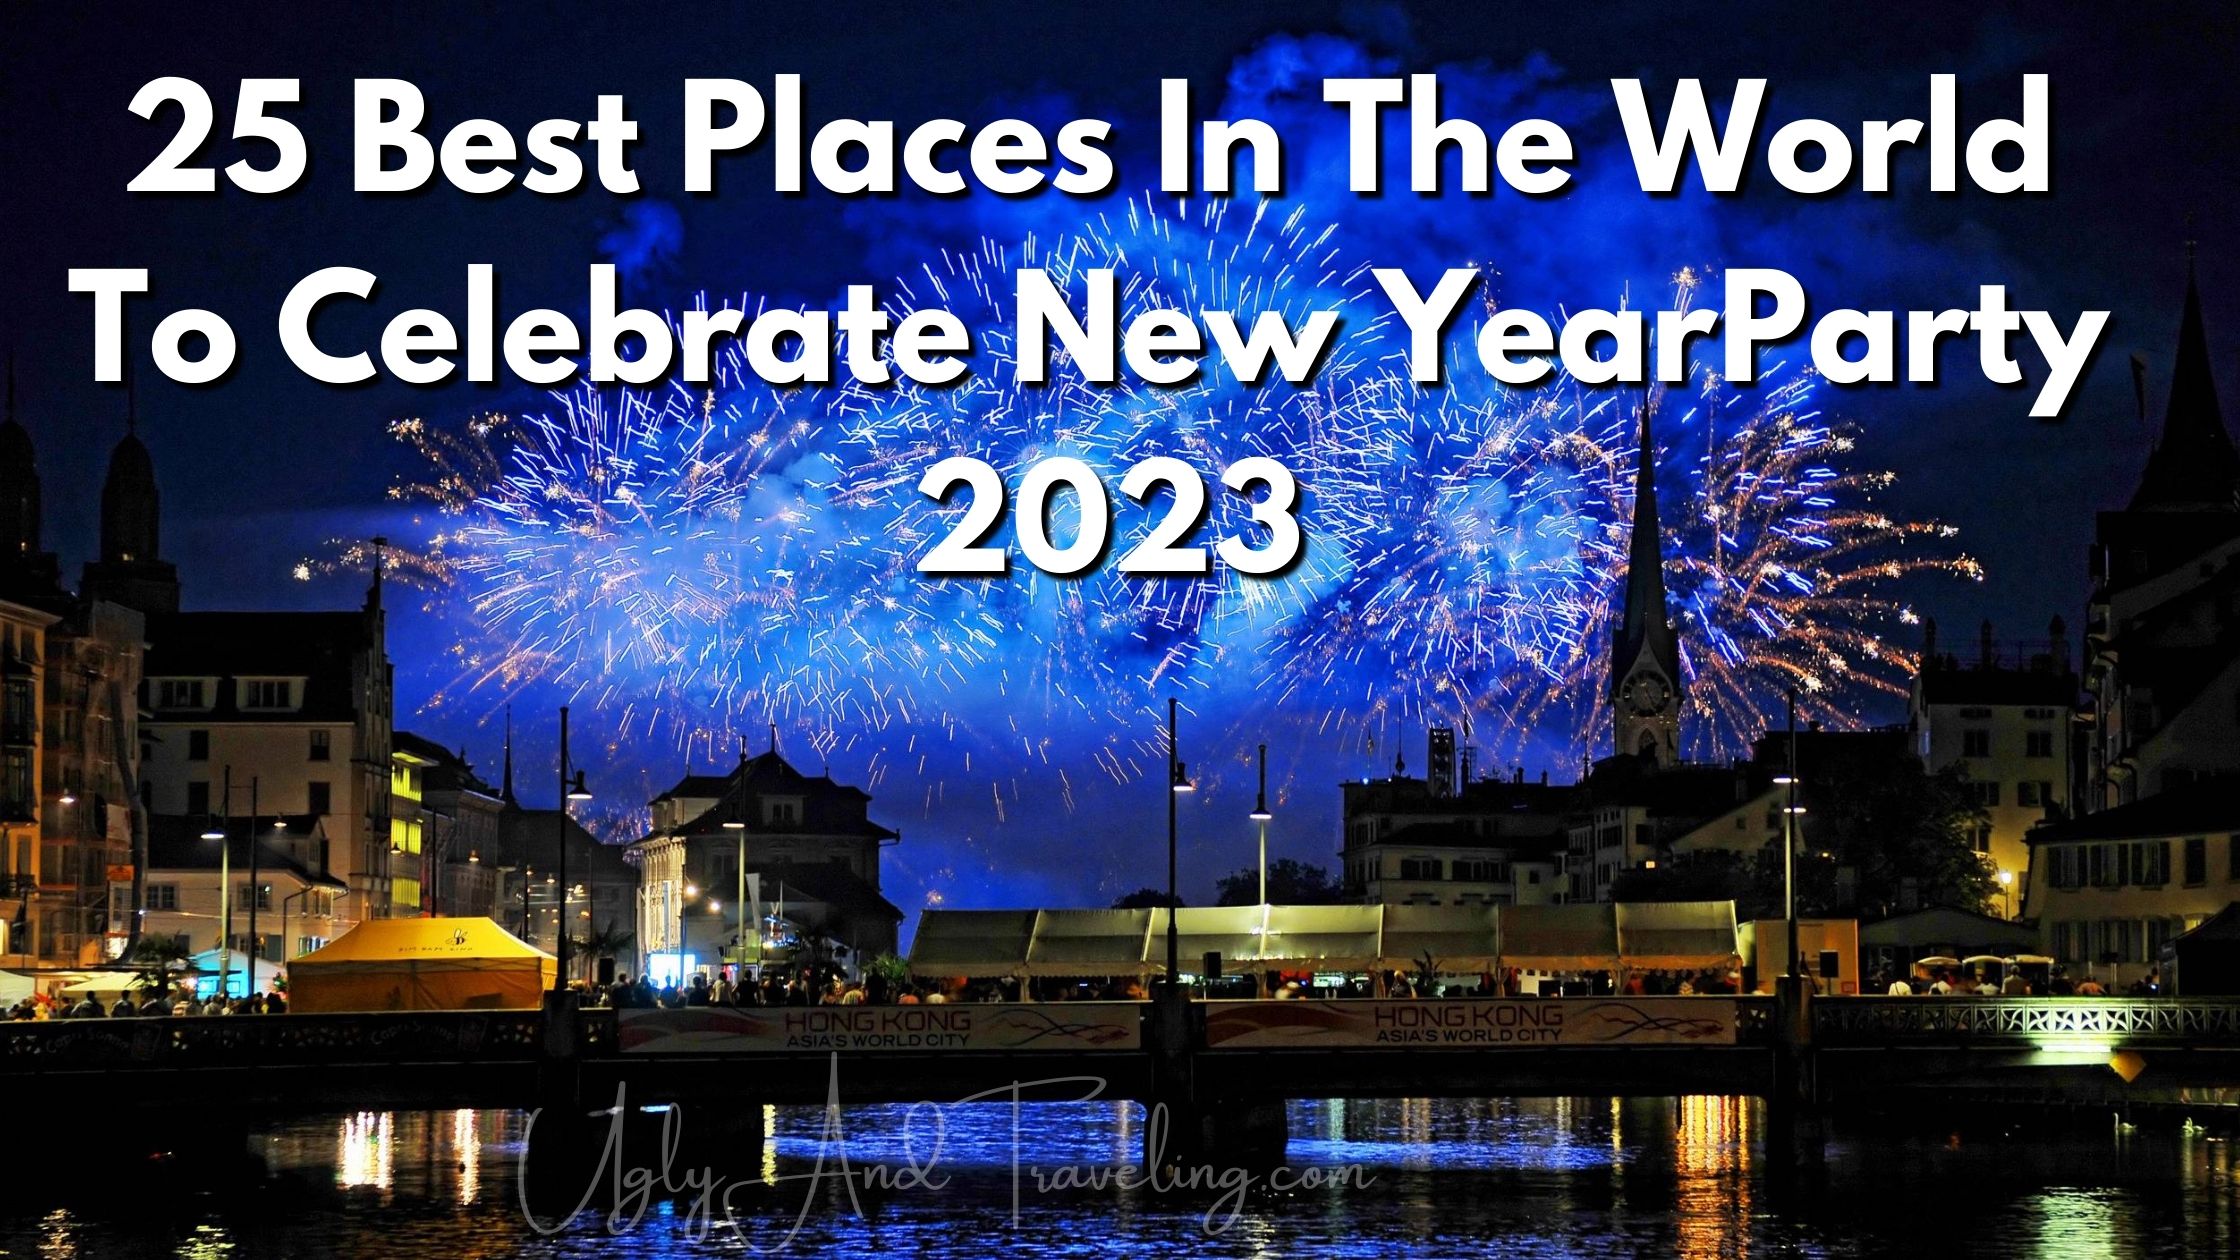 25 Best Places In The World To Celebrate New Year Party 2023